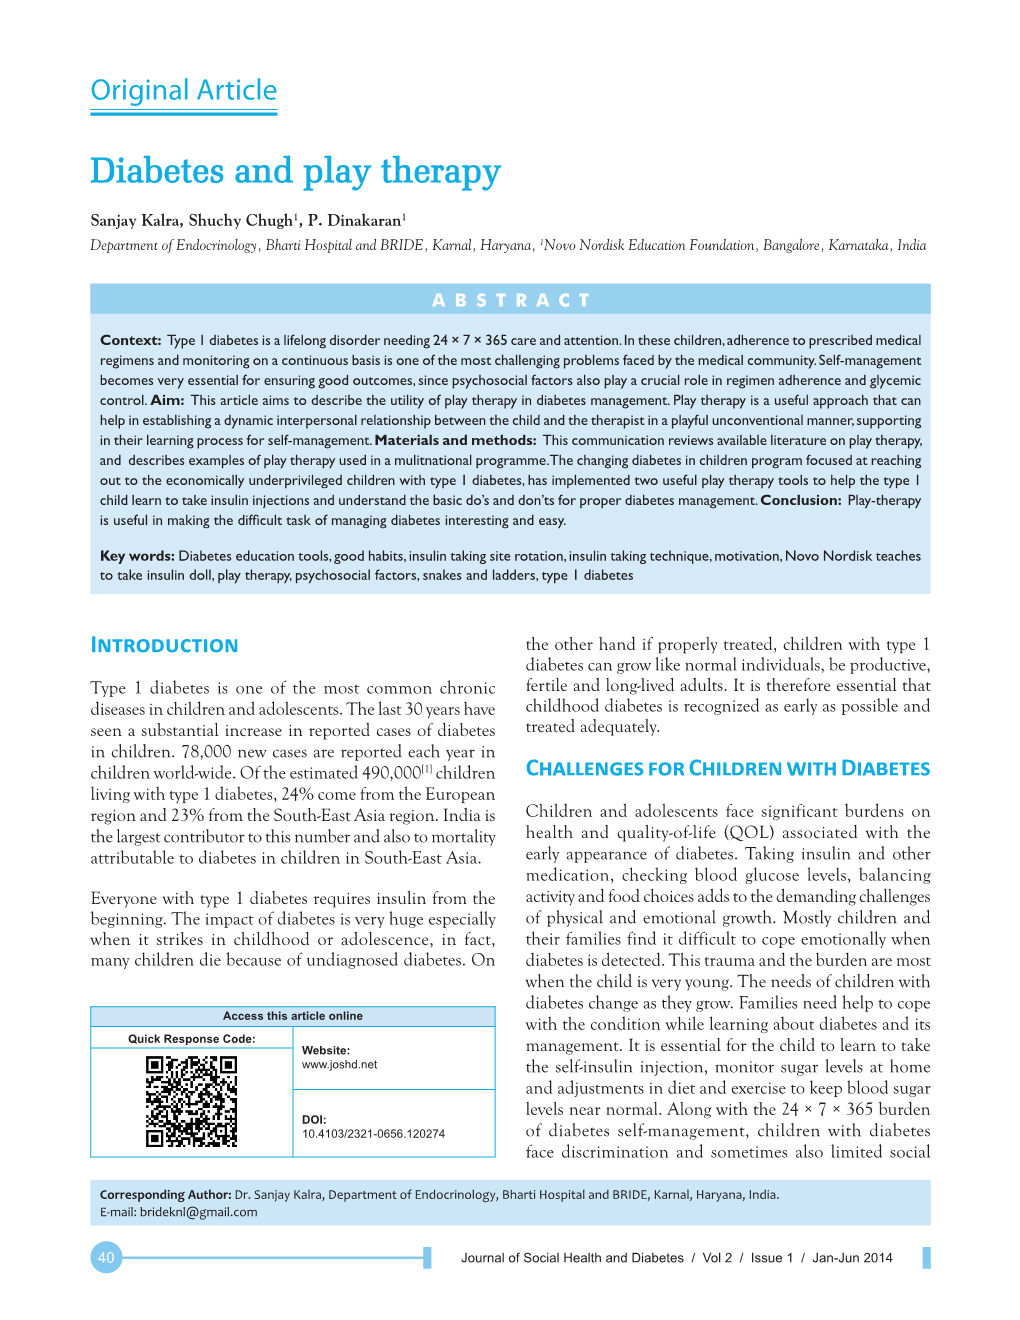 Diabetes and Play Therapy